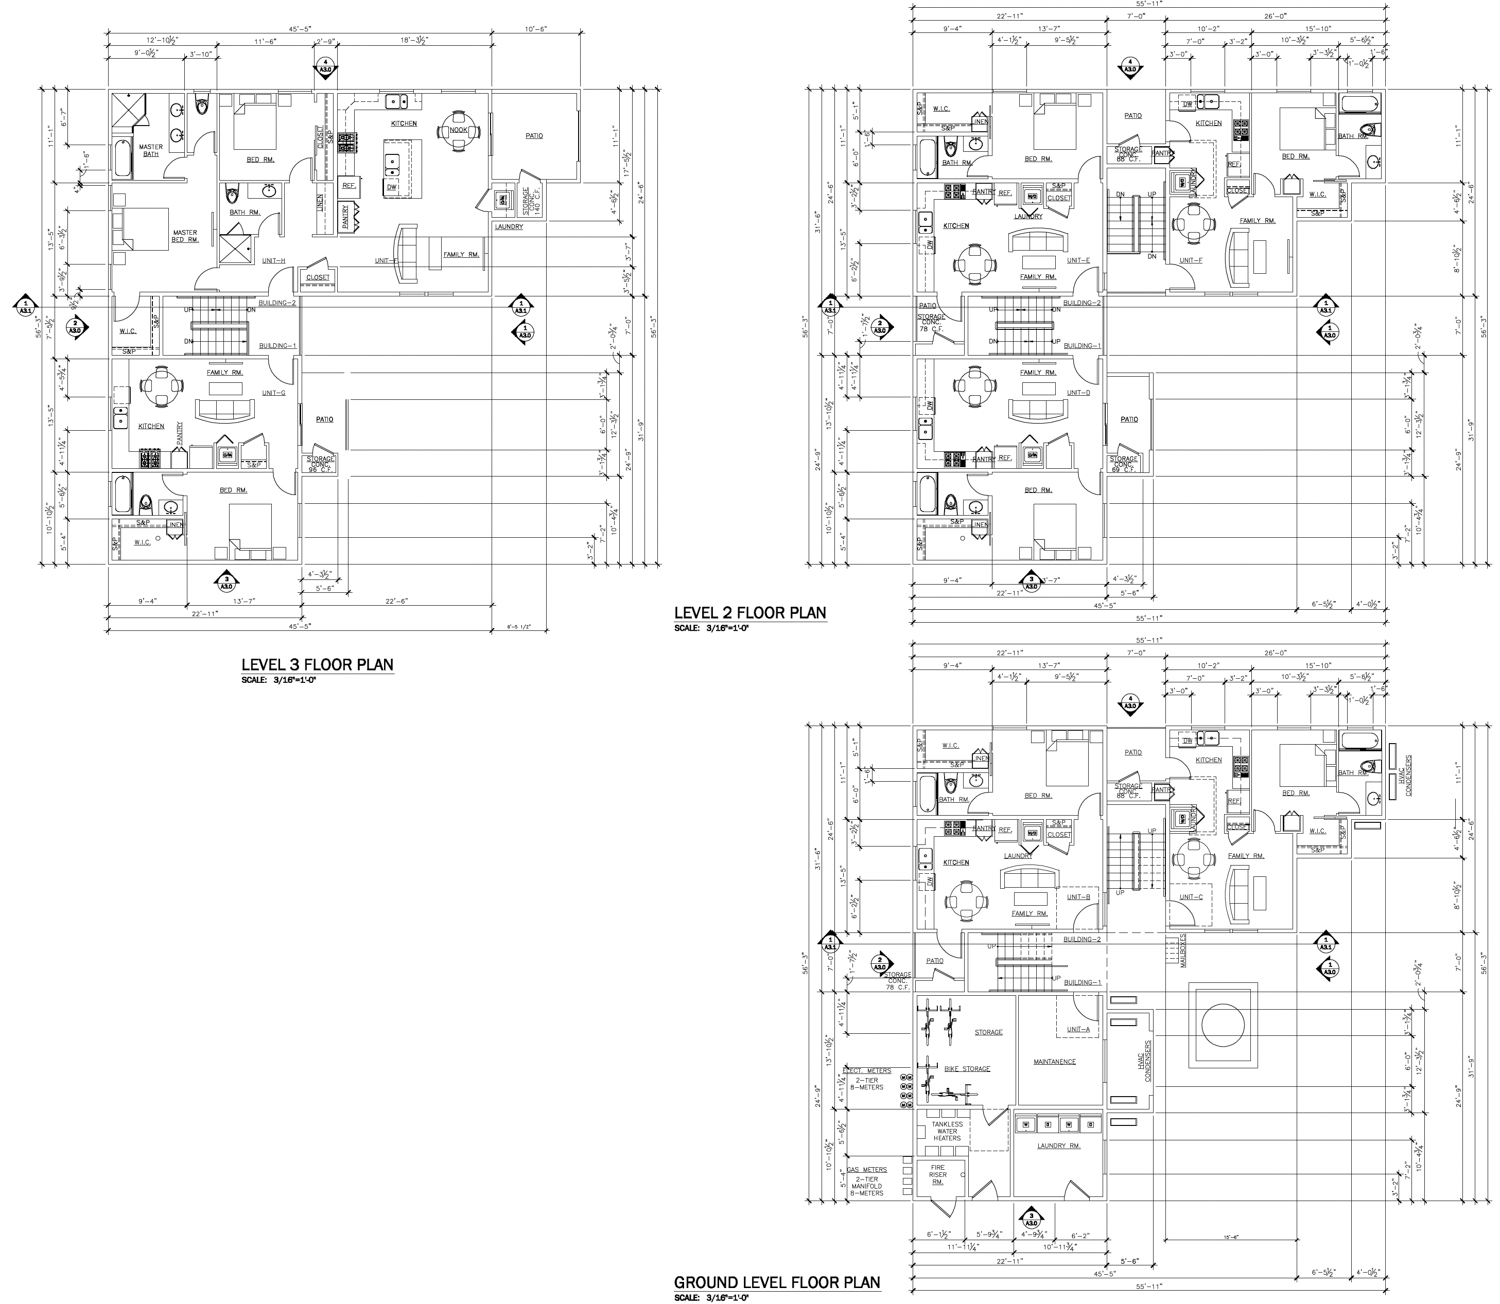 4421 4th Avenue floor plans, illustration by Infinity Design